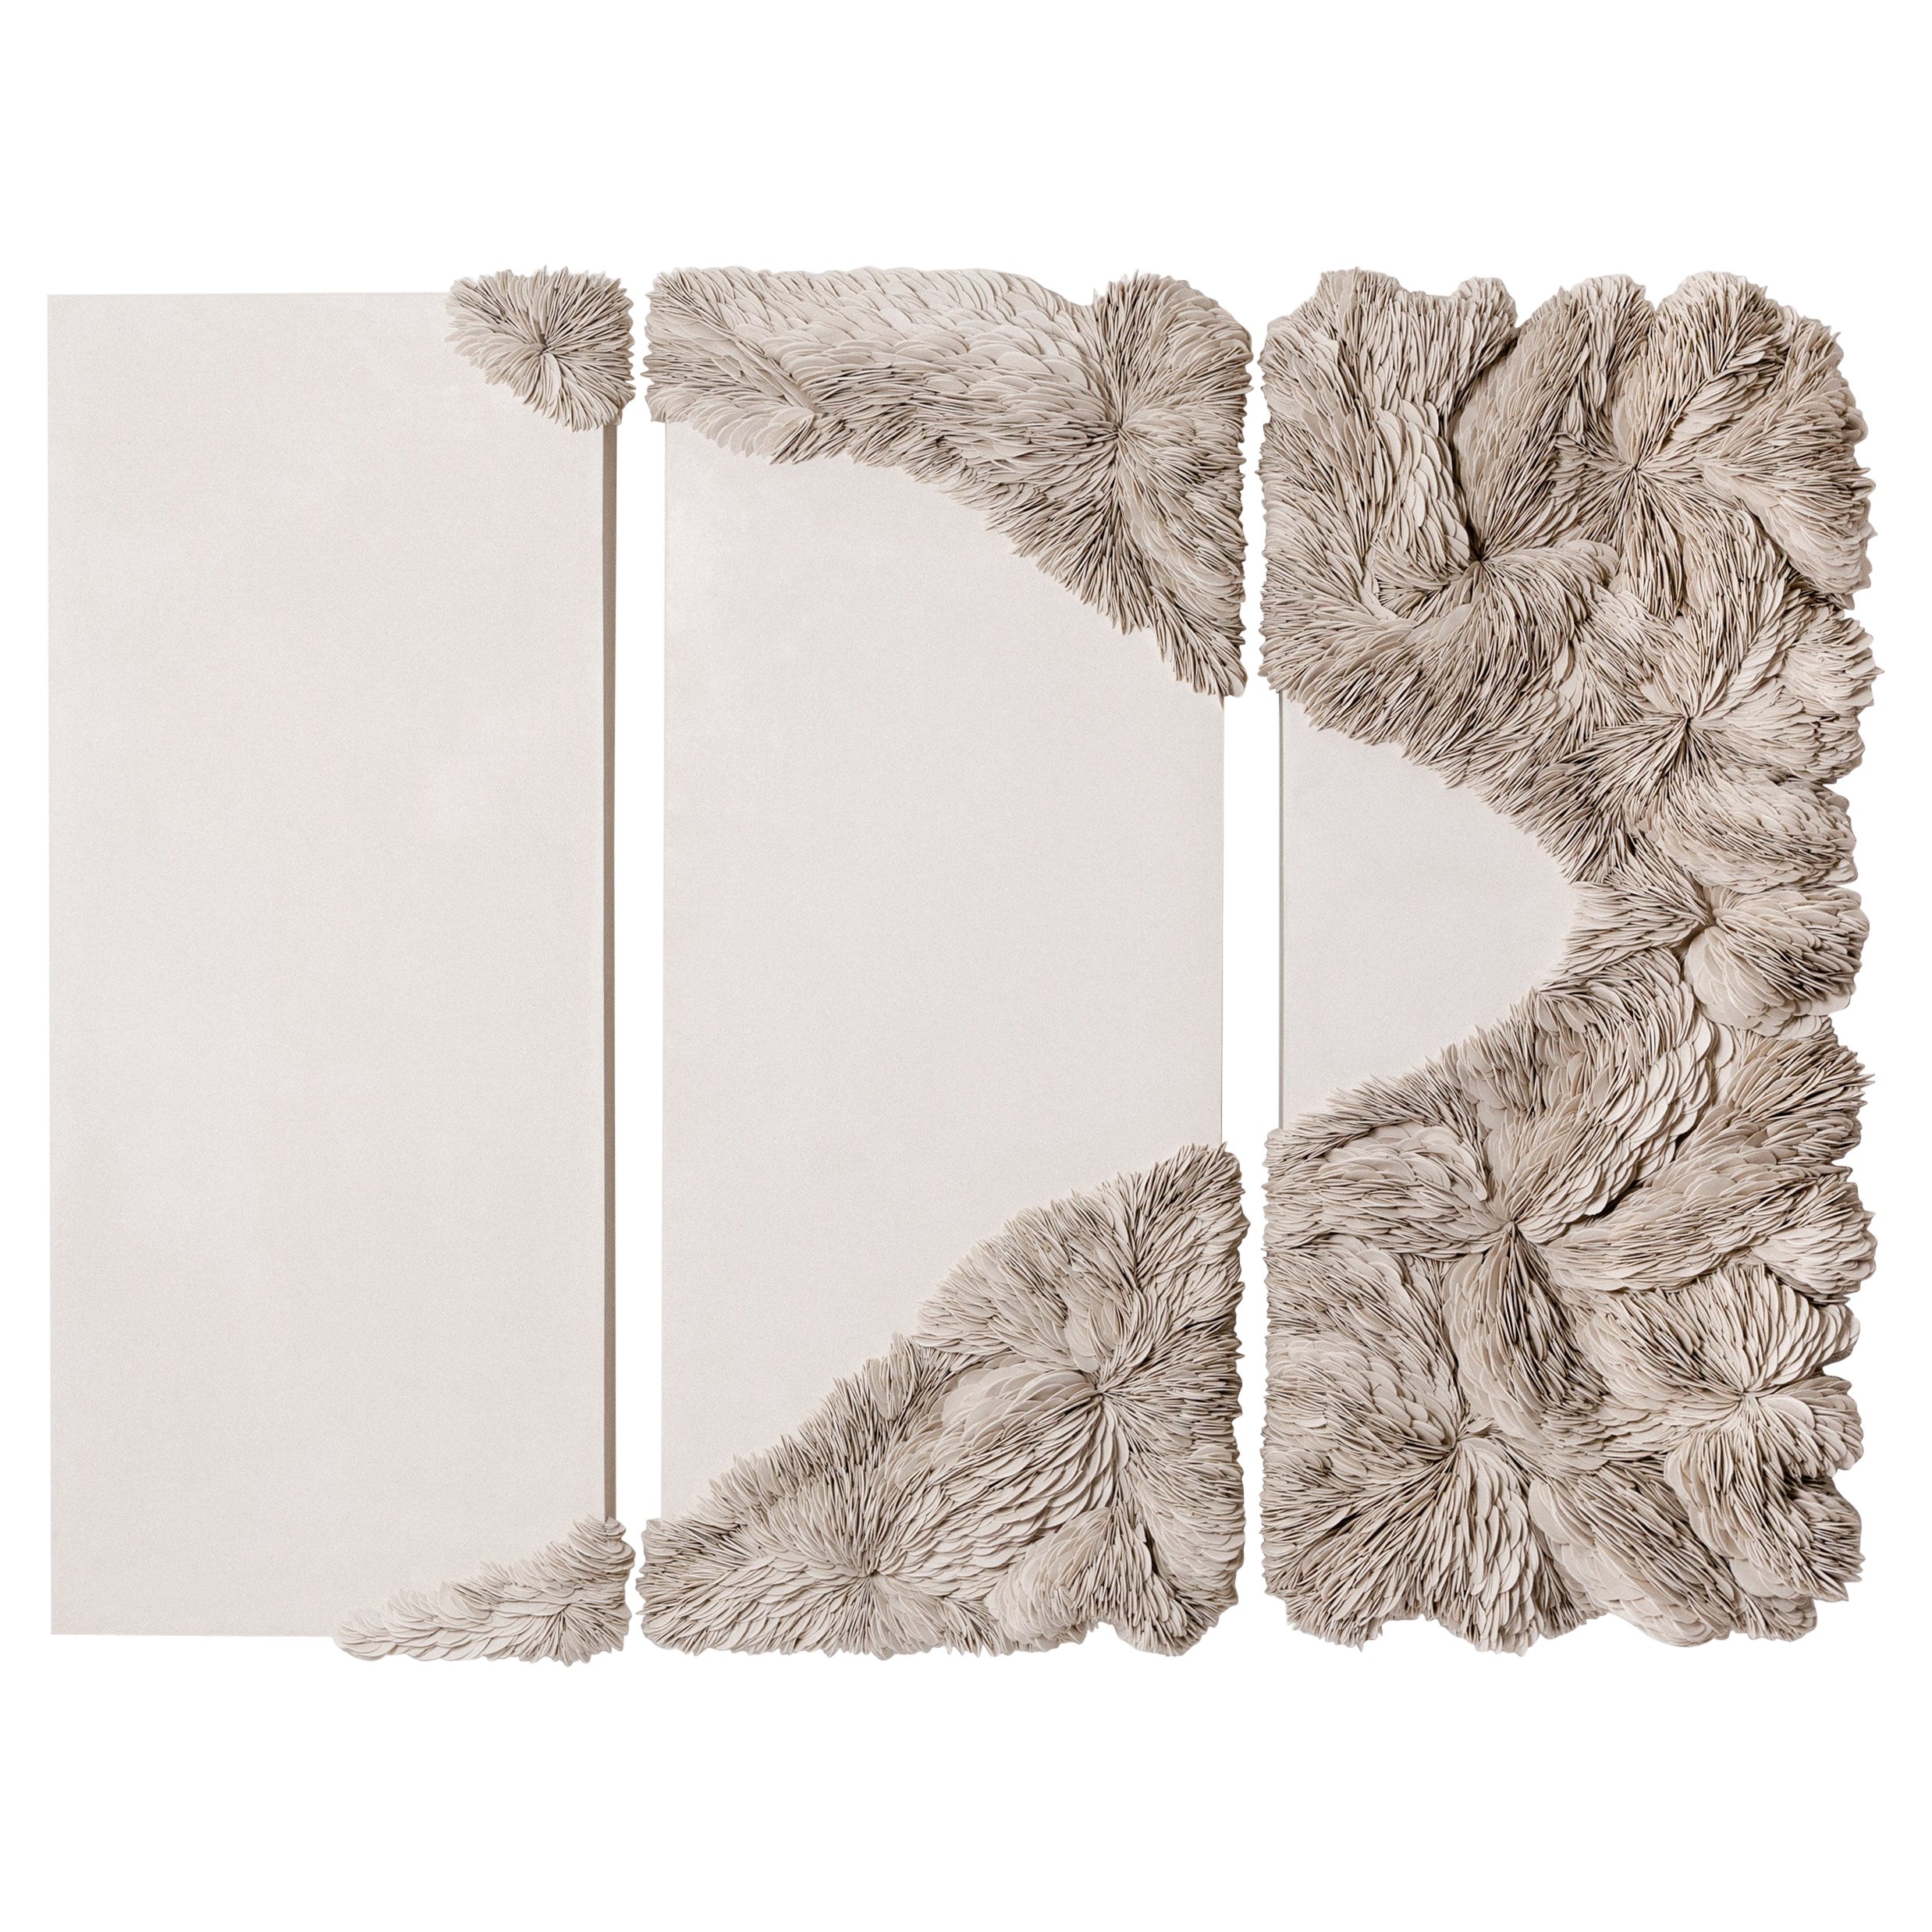 Collapsed Triptych in Sand, porcelain & plaster wall artwork by Olivia Walker